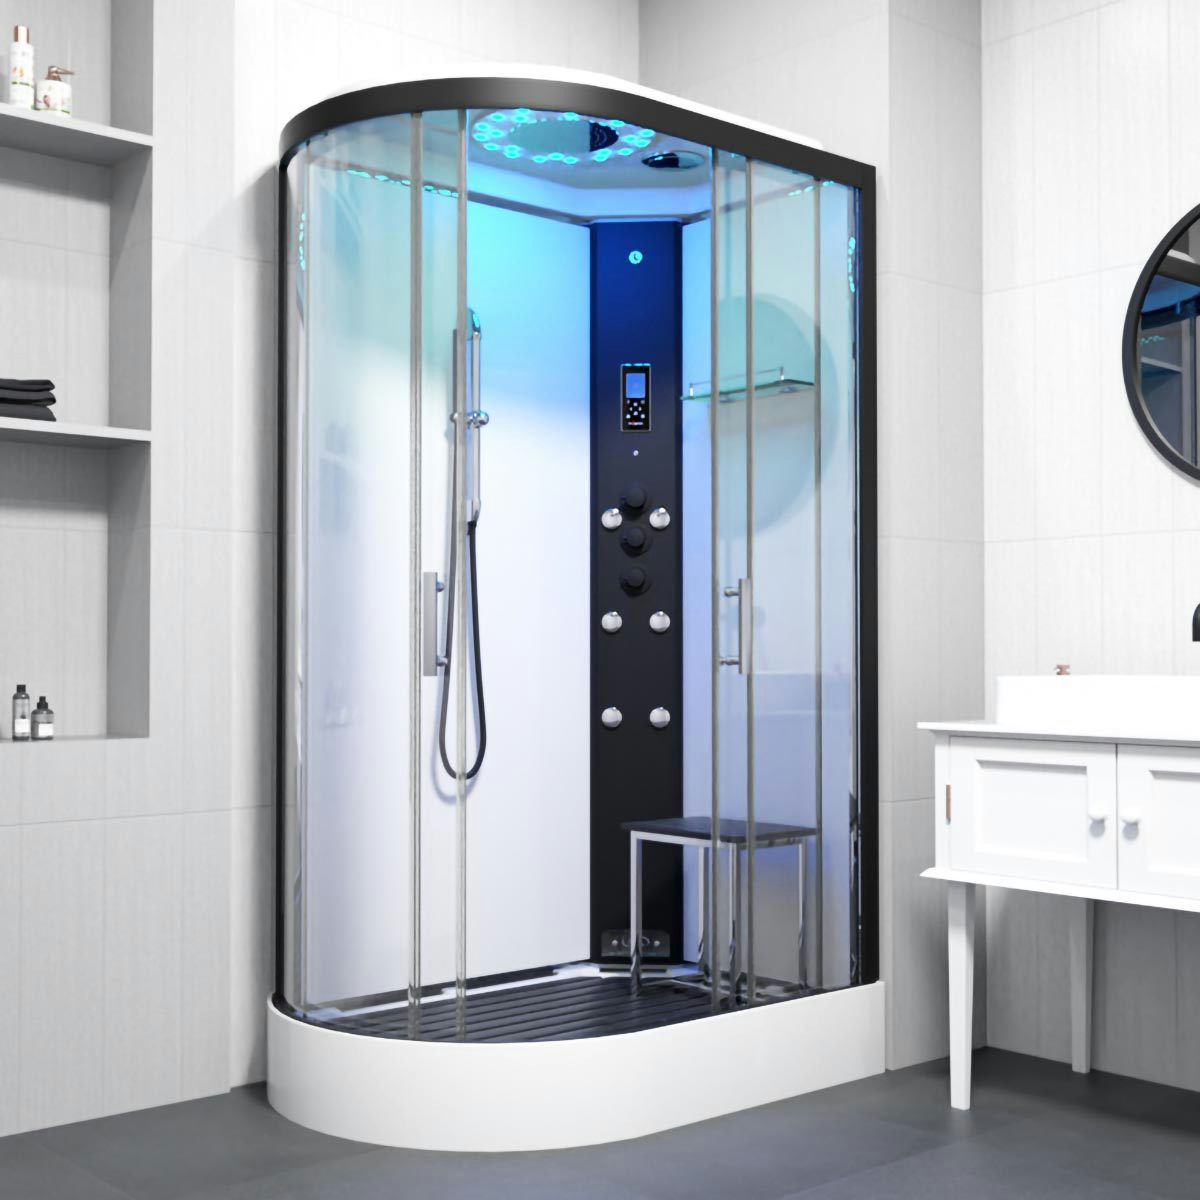 Insignia Monochrome offset right handed steam shower cabin 1200 x 800